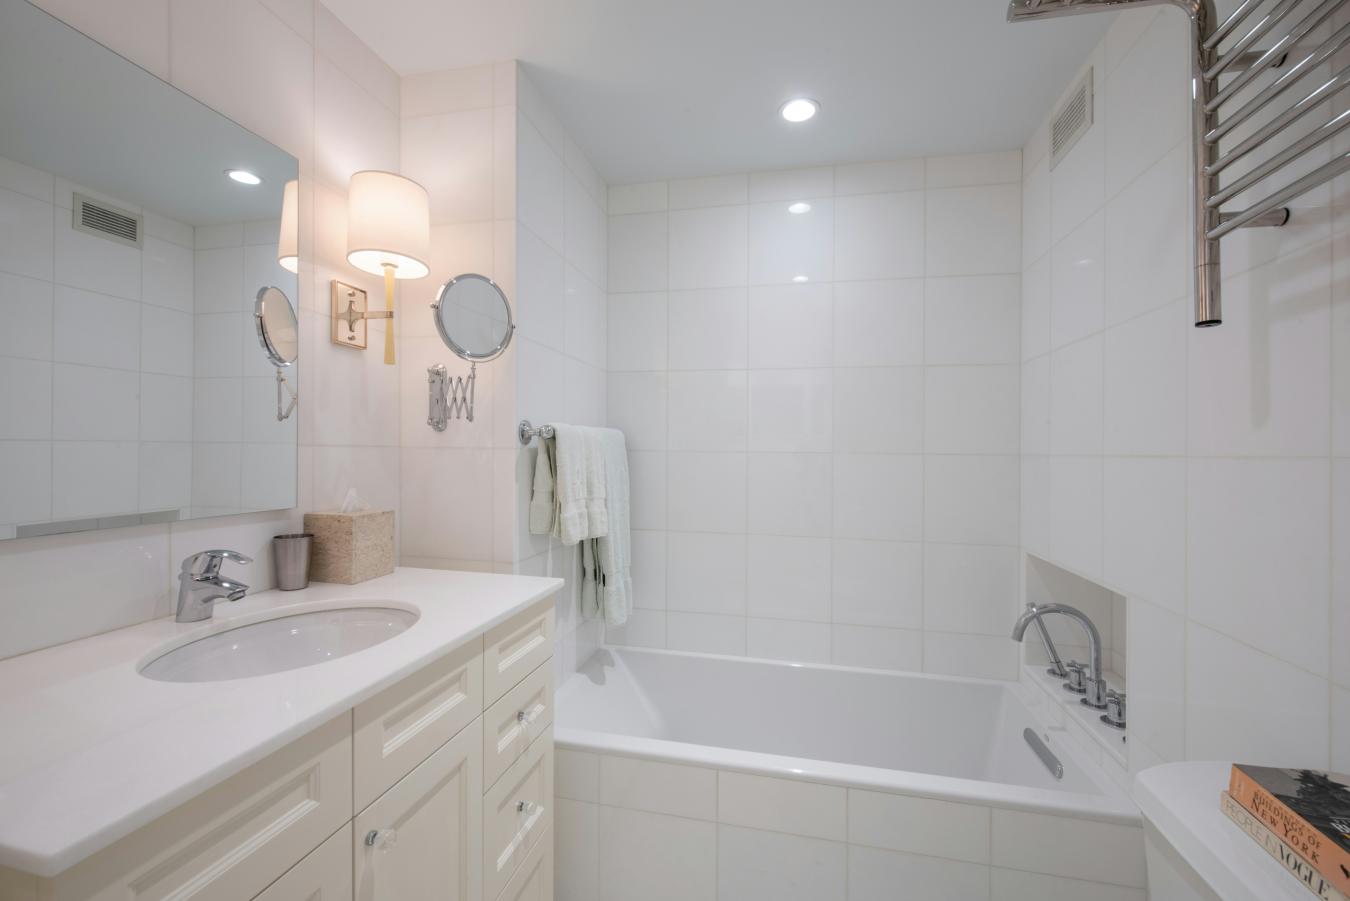 3 EAST 71ST STREET, New York, New York, 10021, United States, 2 Bedrooms Bedrooms, ,2 BathroomsBathrooms,Residential,For Sale,3 EAST 71ST STREET,1447770